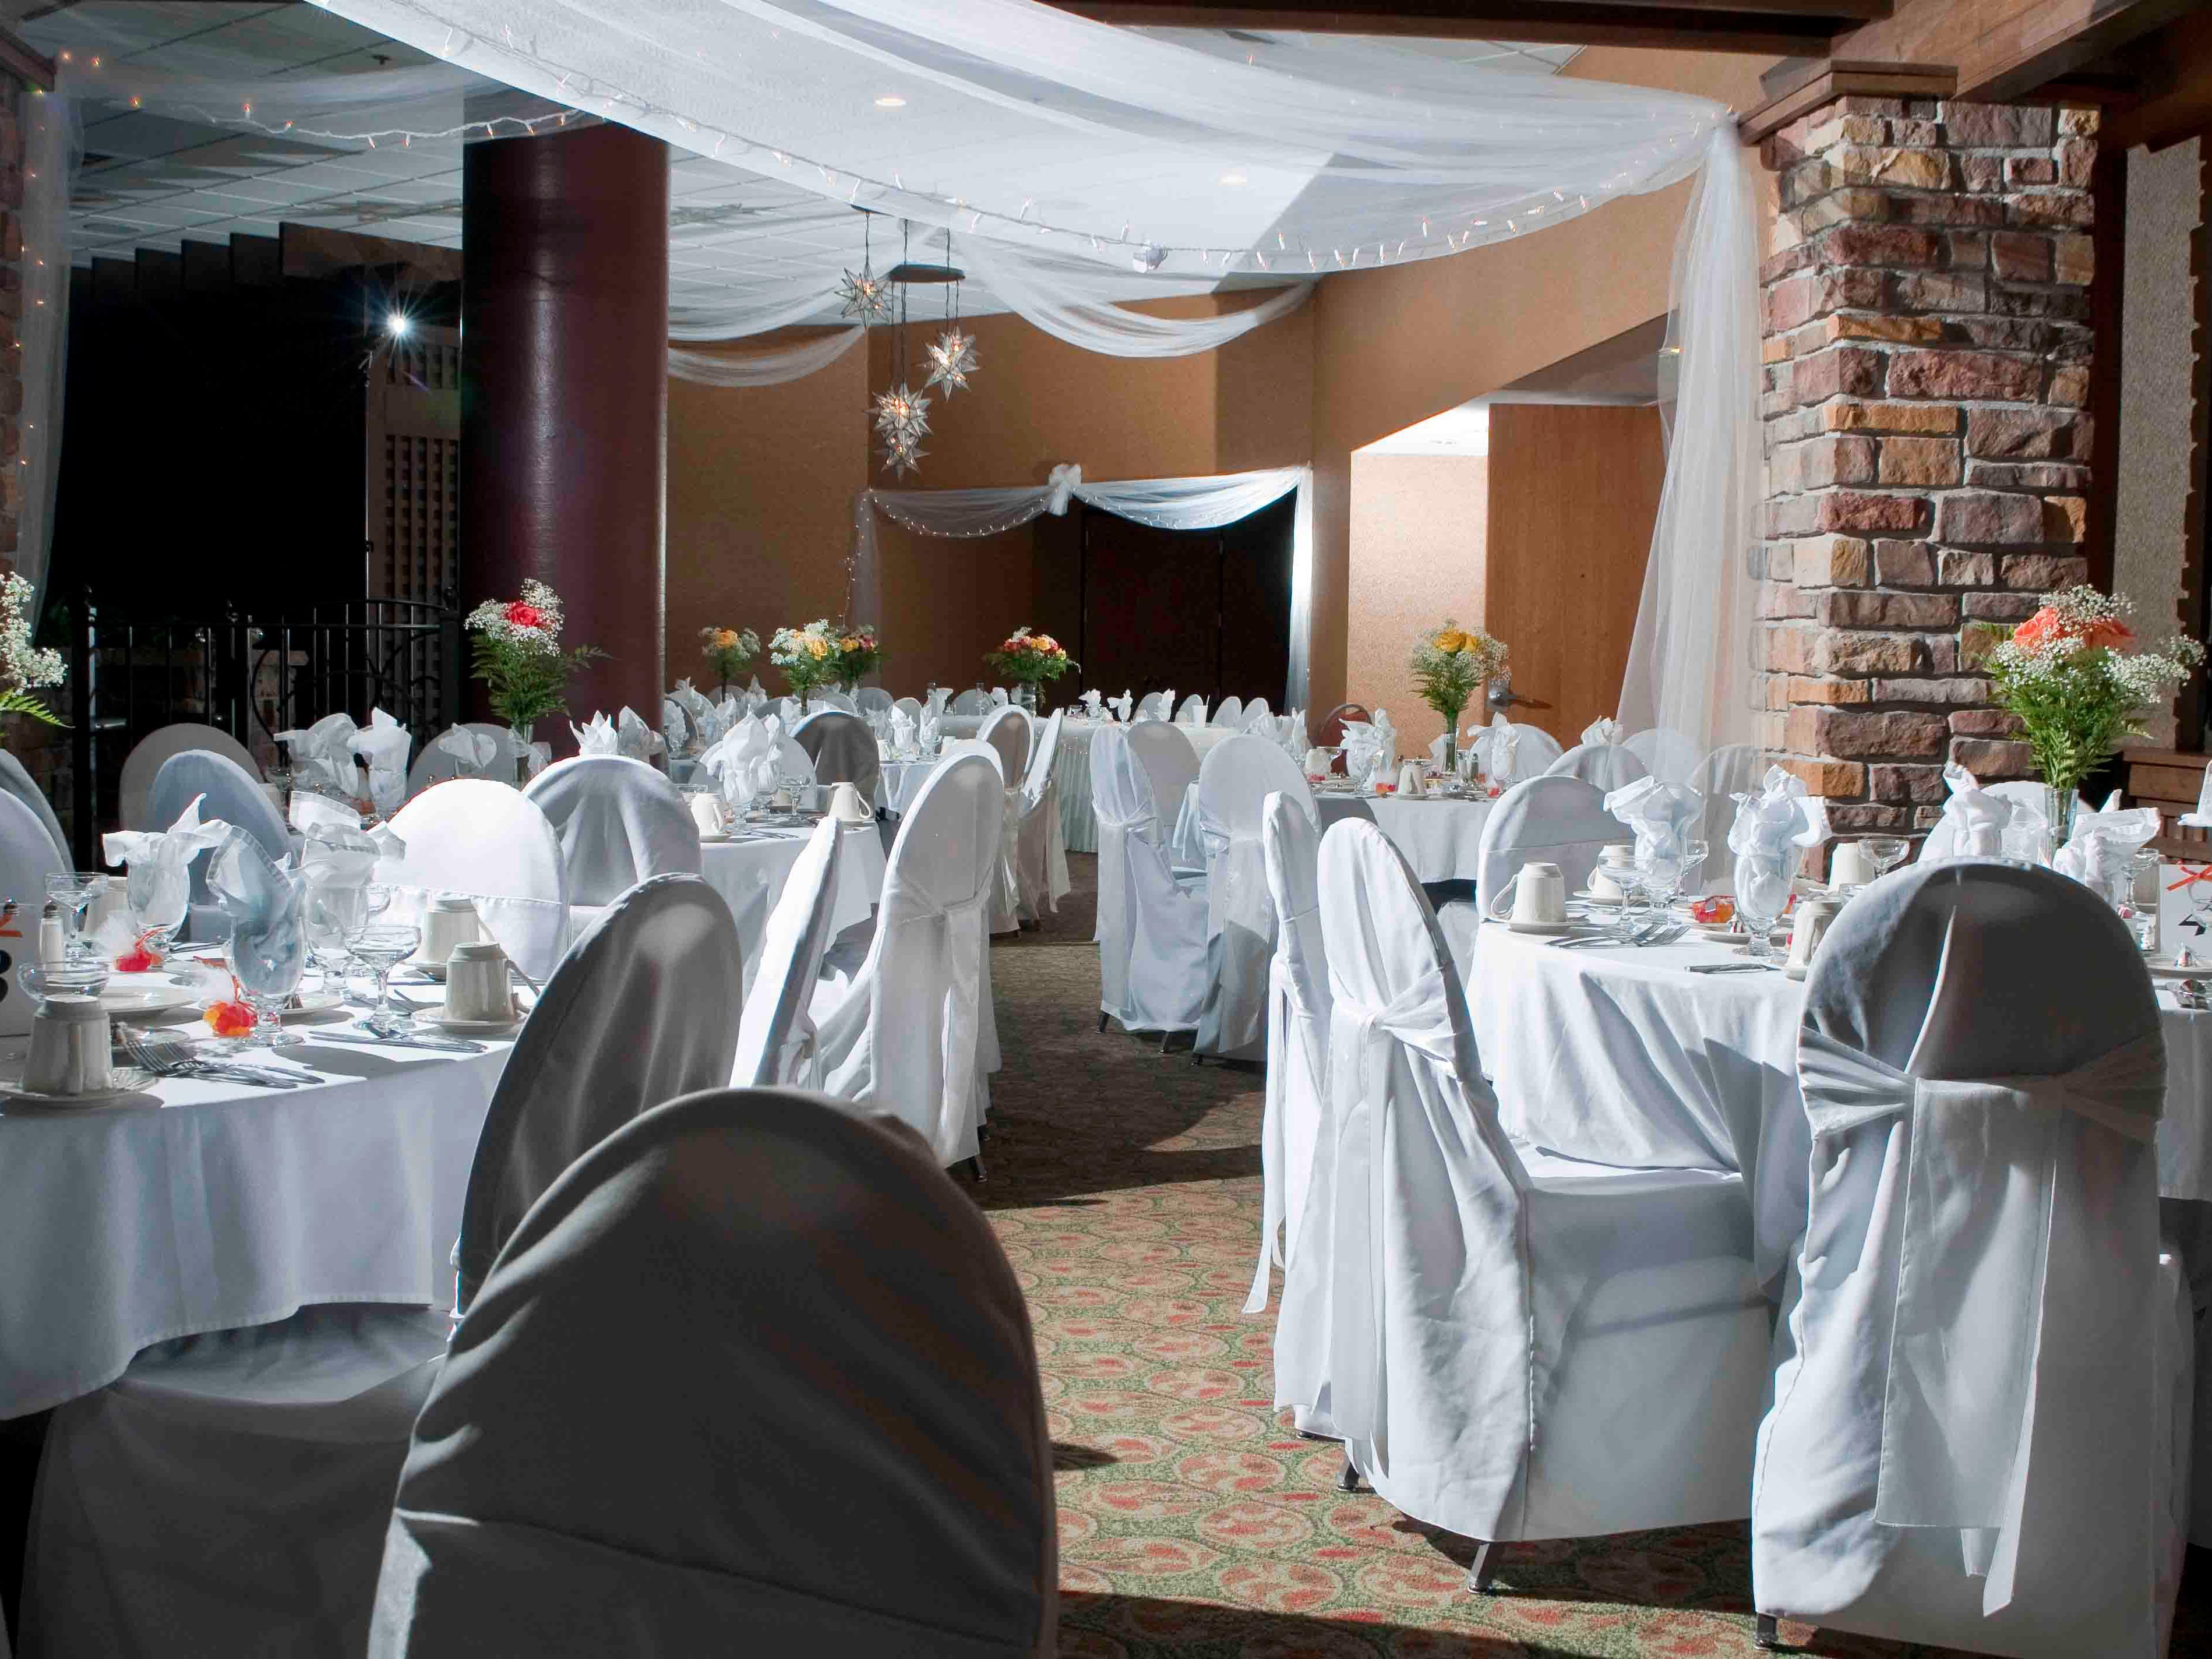 Our hotel features flexible meeting space for intimate groups of 12 to more sizeable groups of 150 or more. Our dedicated events team are on hand to help you plan everything from menu choices to equipment needs or the room blocks for your larger groups.  Planning made simple!